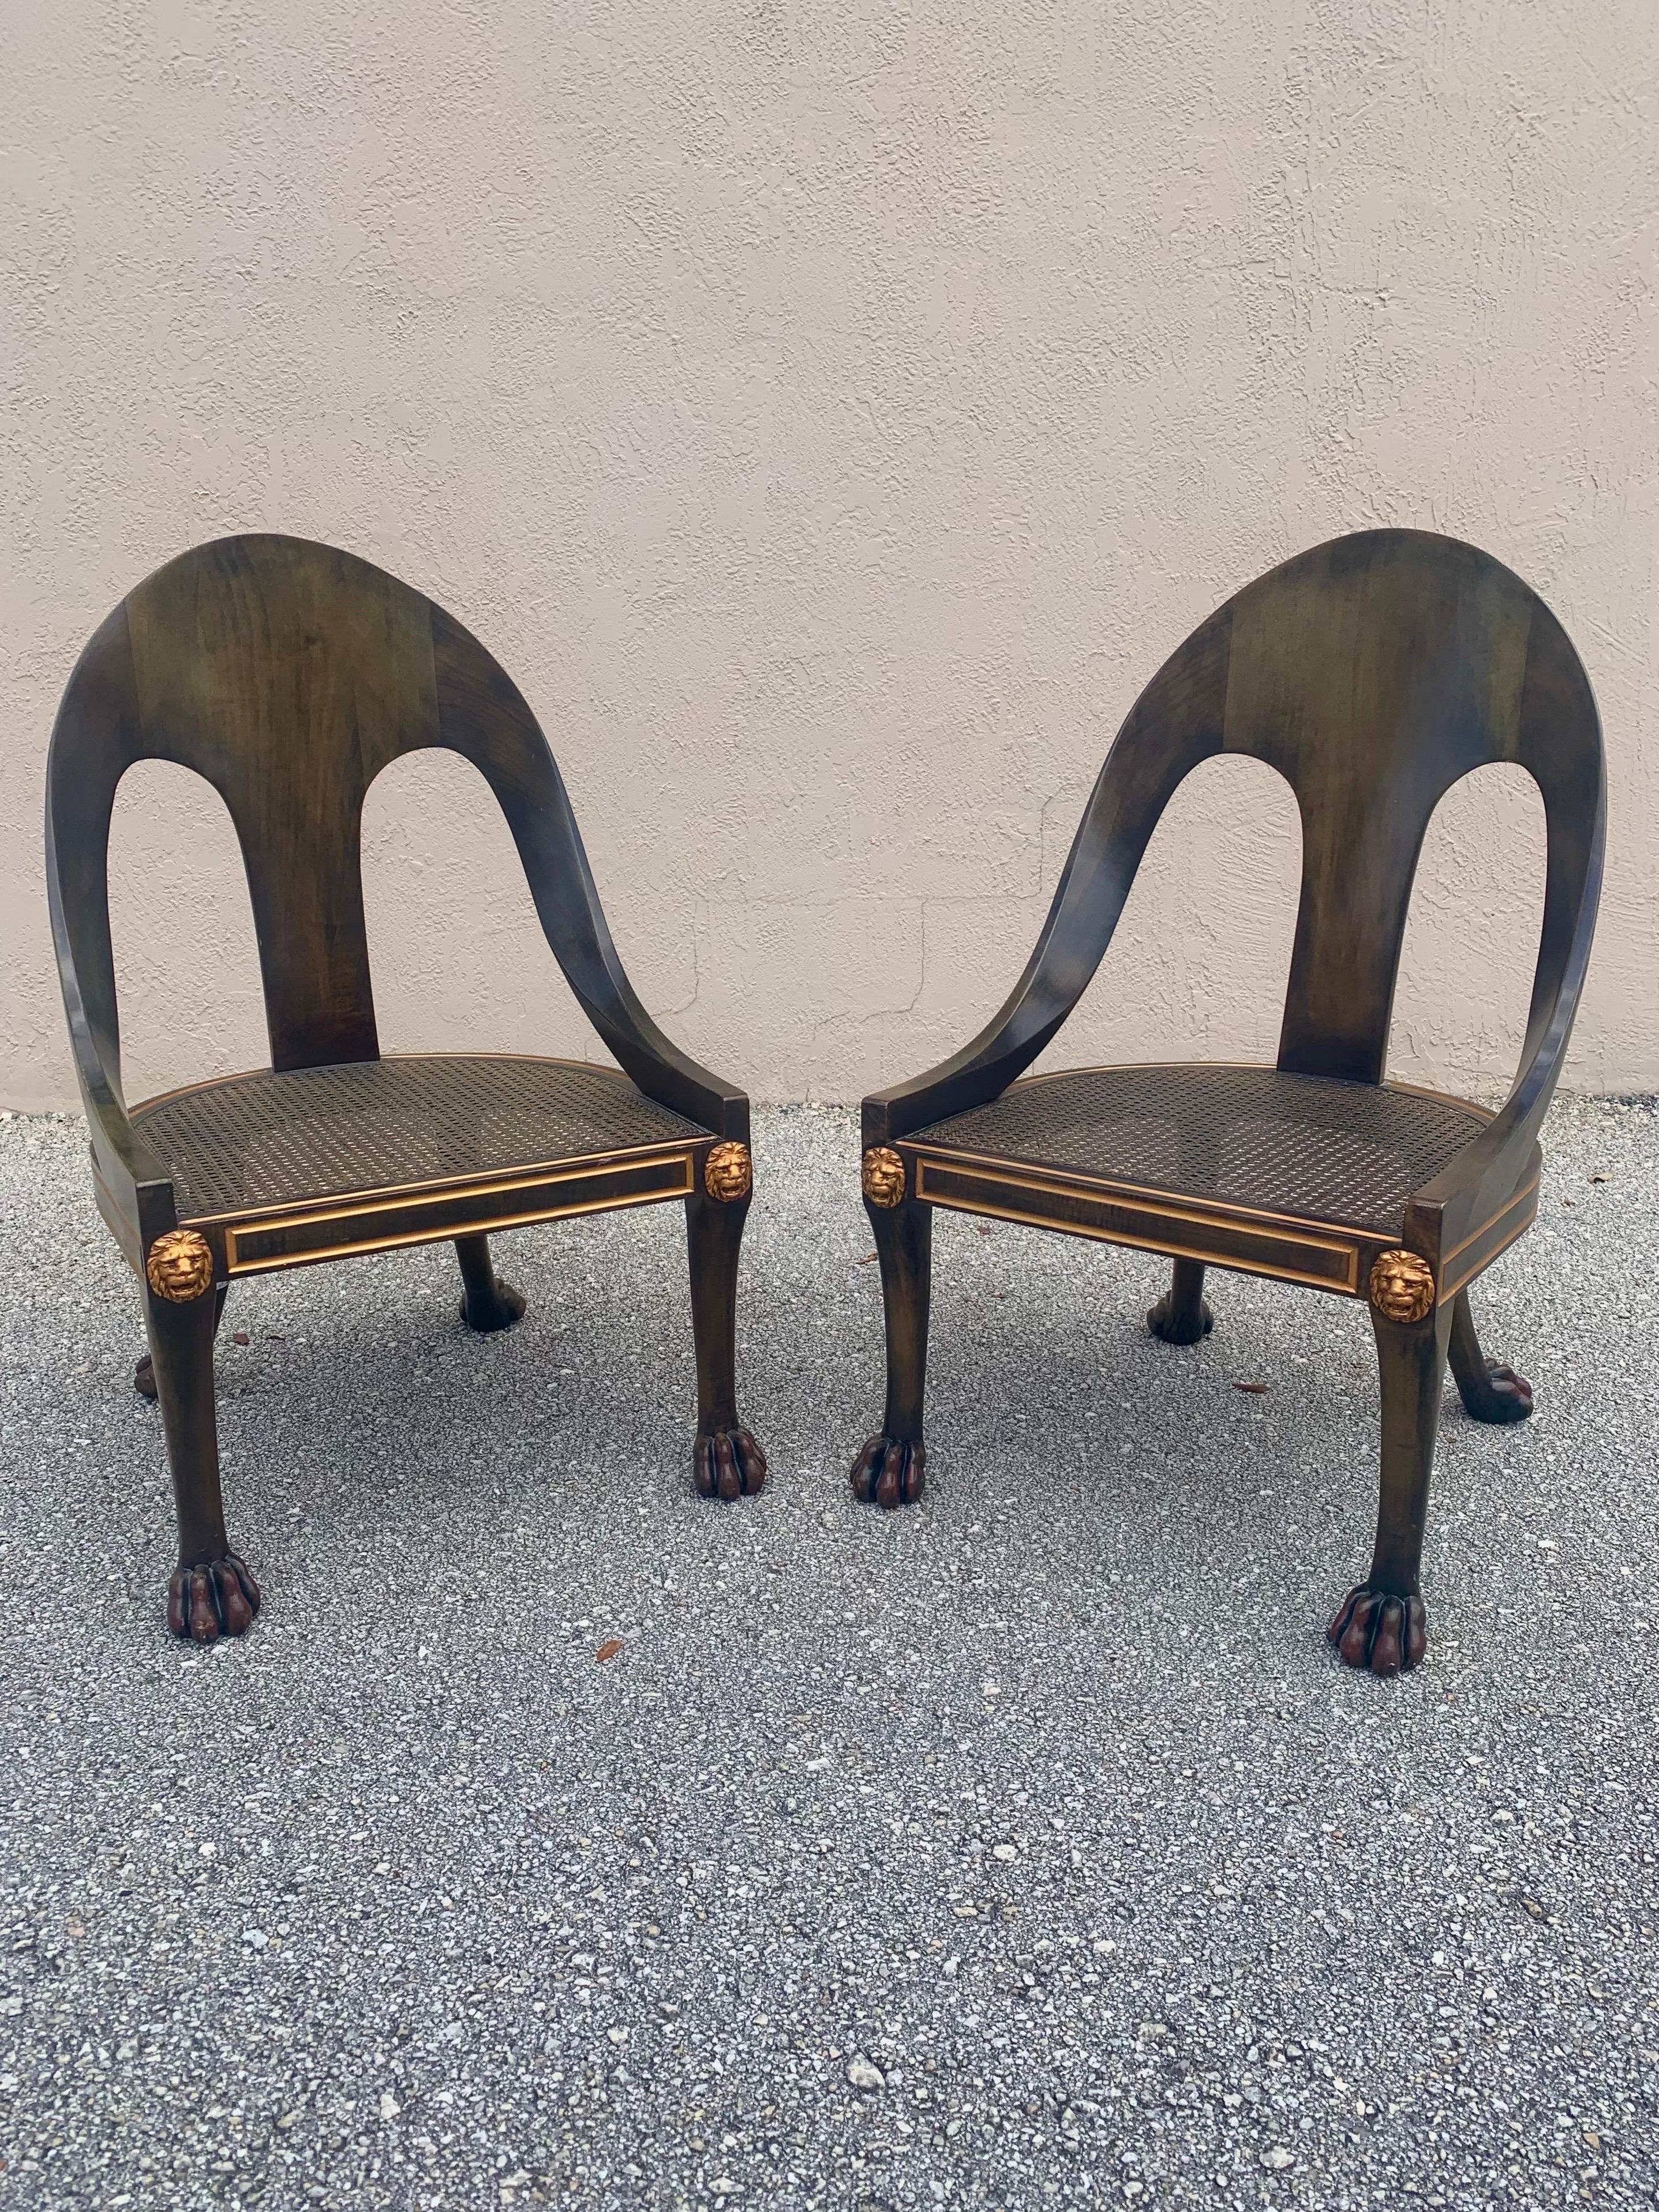 Pair of elegant spoonback chairs by Baker Furniture. Hollywood regency style shapes and accents with beautiful details of claw feet, lions heads, and inlay channels. The channels and lions head are gilt finished and there is an undertone of red